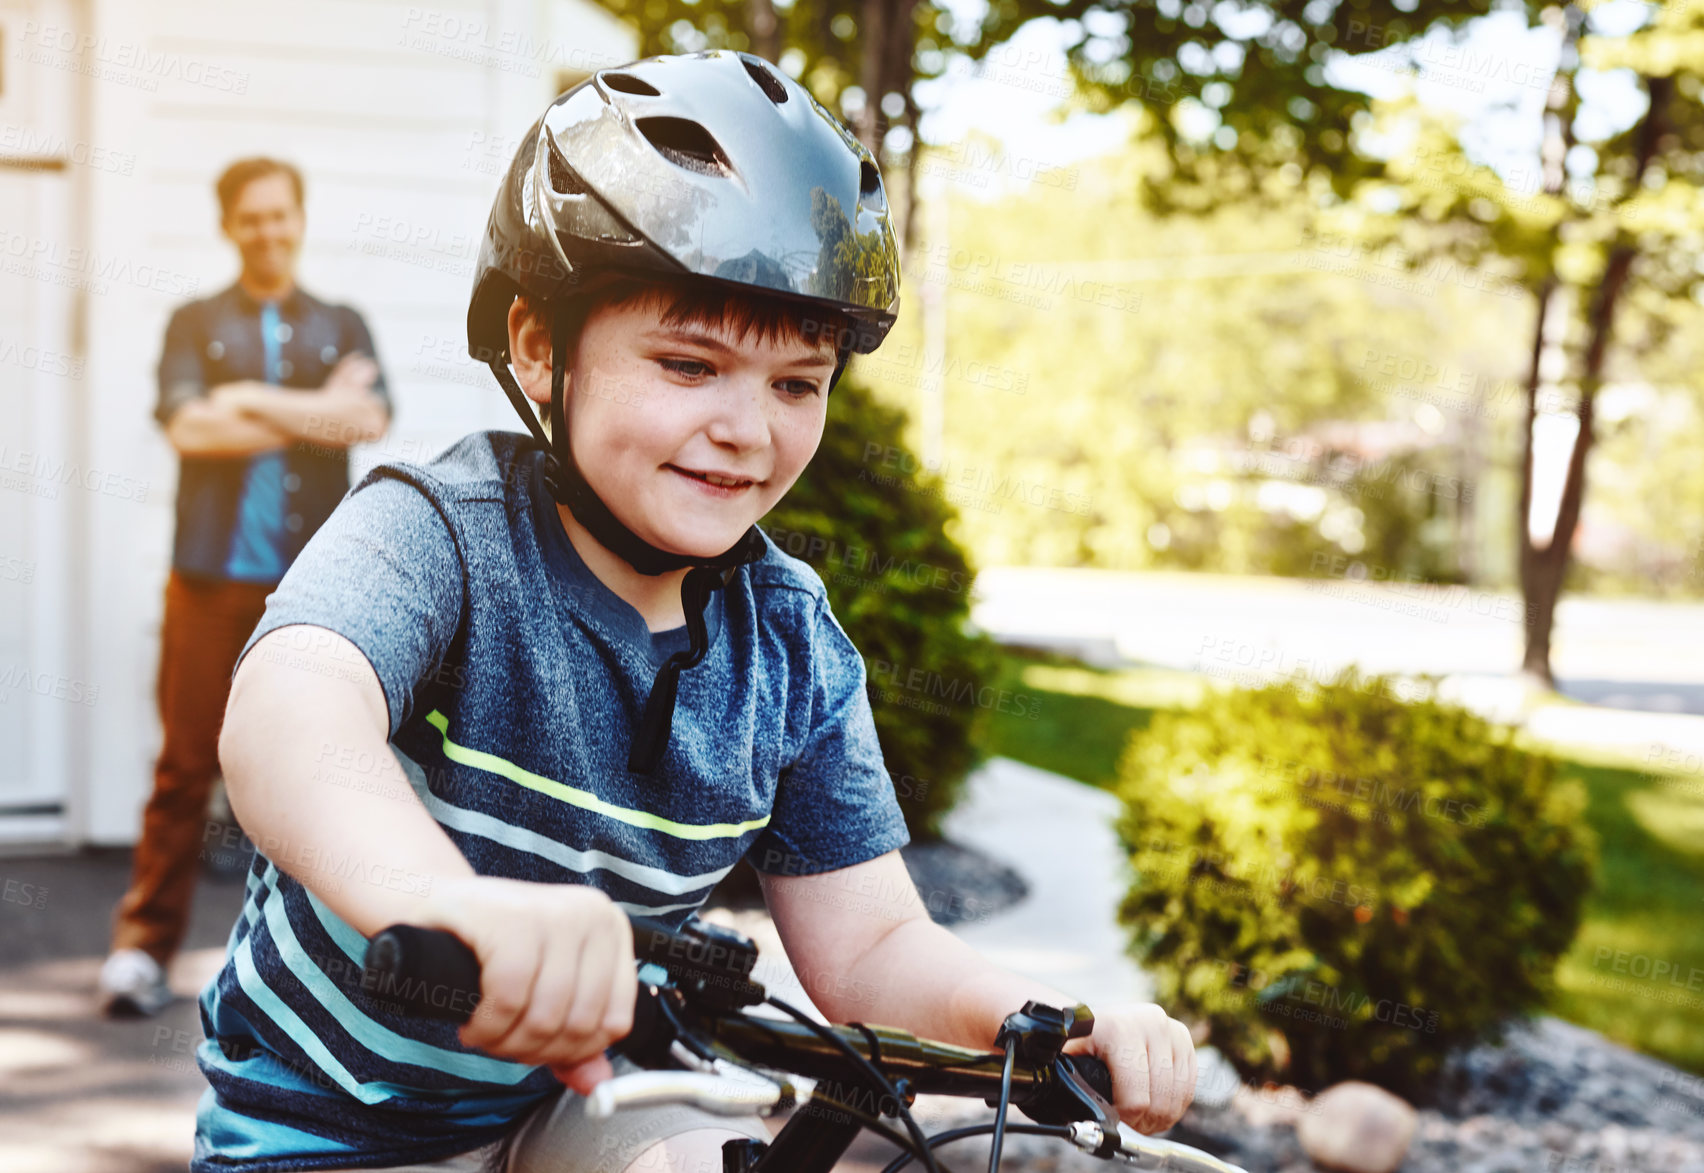 Buy stock photo Shot of a young boy riding a bicycle with his father in the background